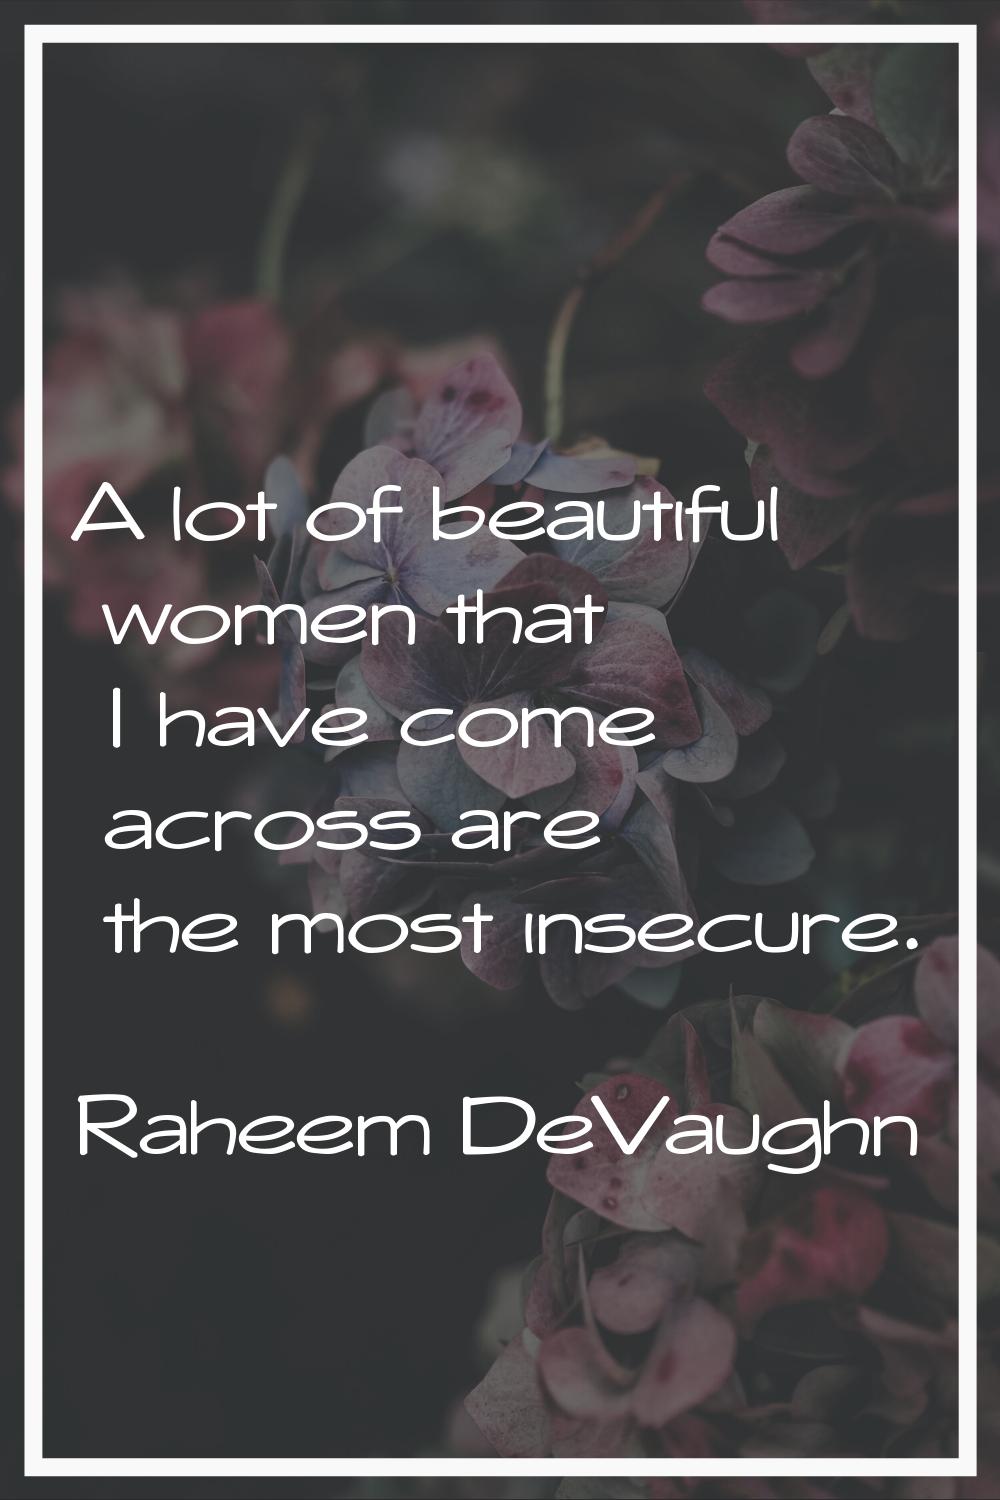 A lot of beautiful women that I have come across are the most insecure.